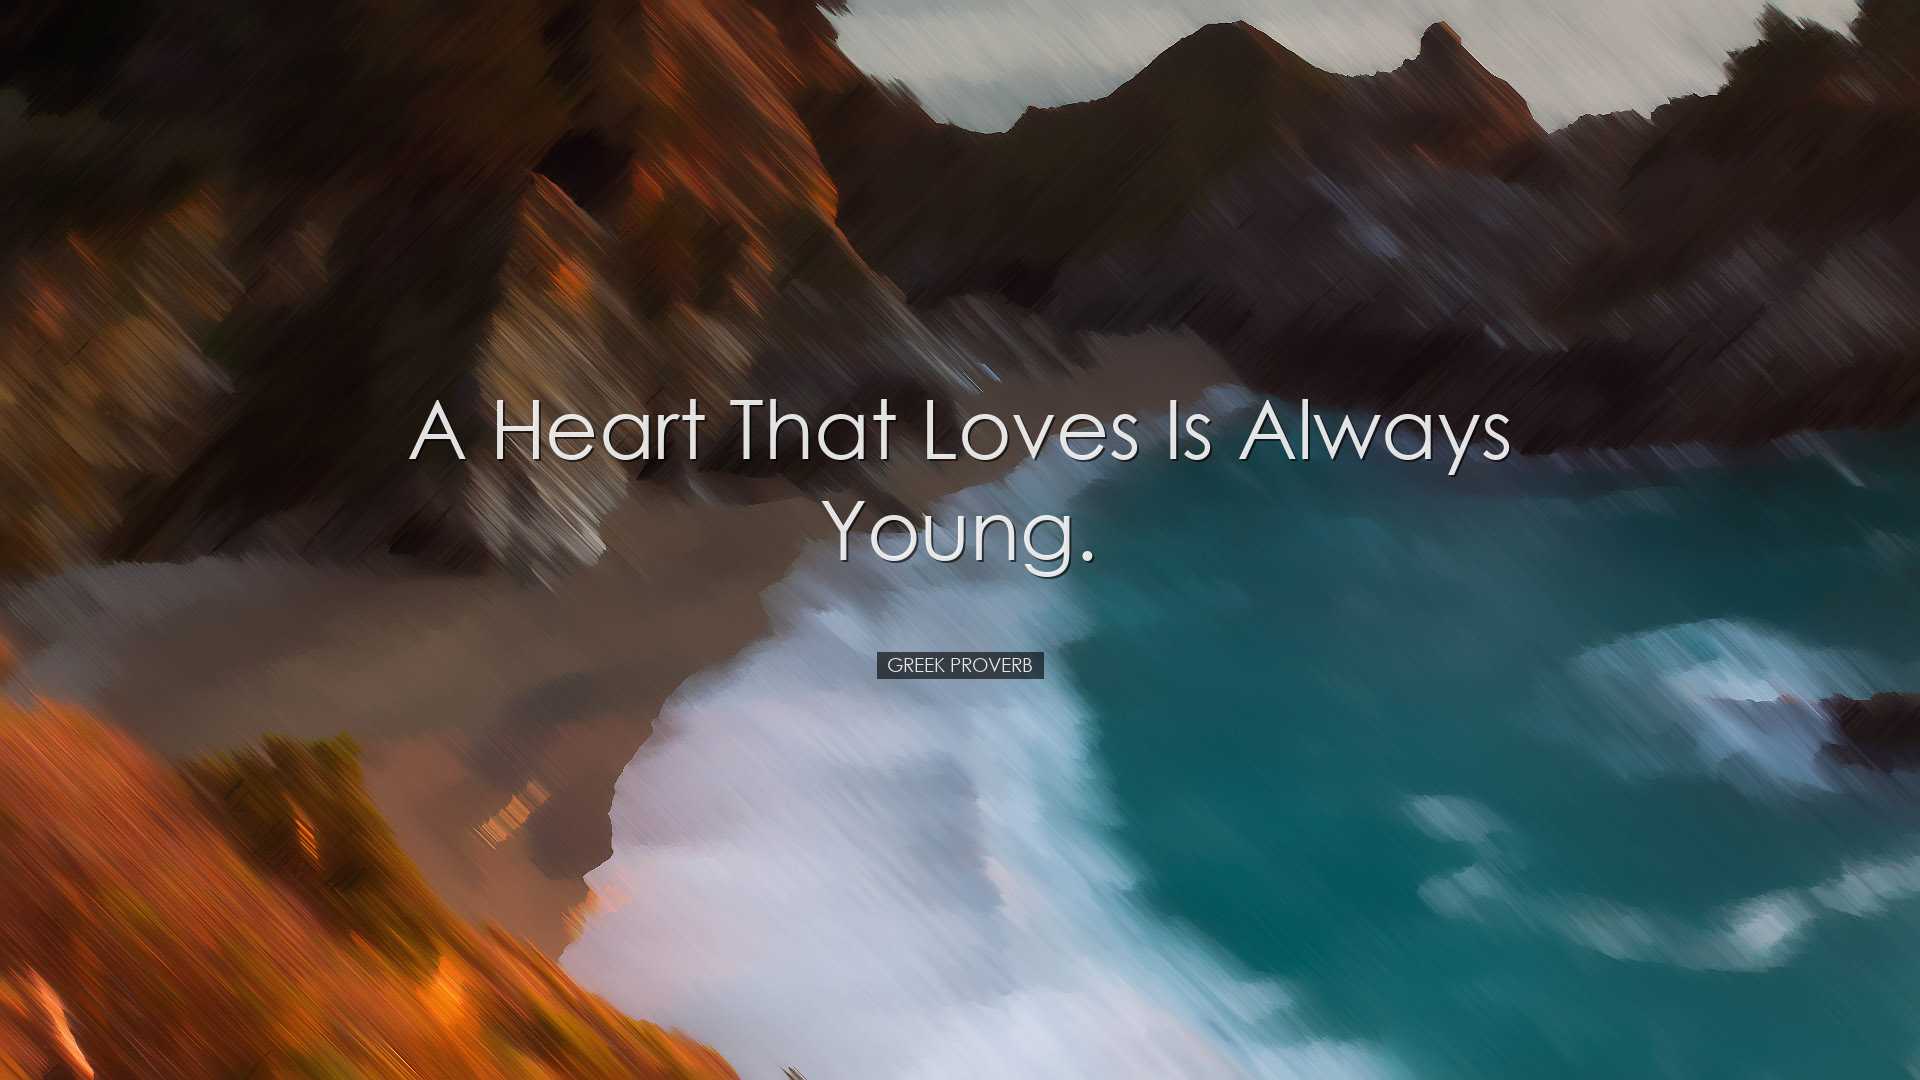 A heart that loves is always young. - Greek Proverb